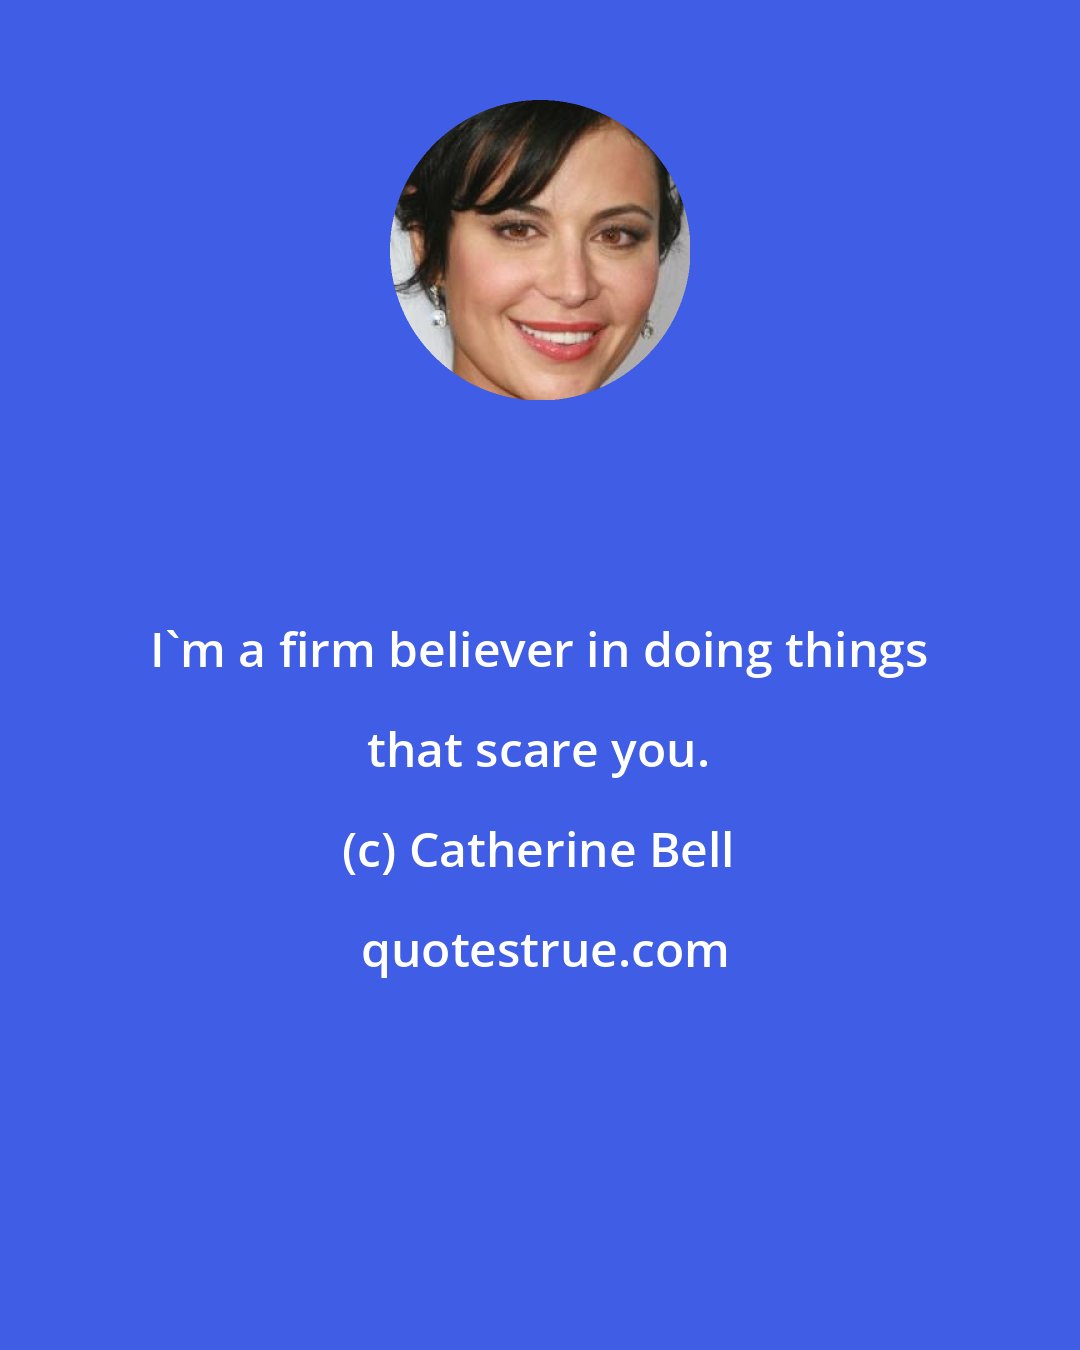 Catherine Bell: I'm a firm believer in doing things that scare you.